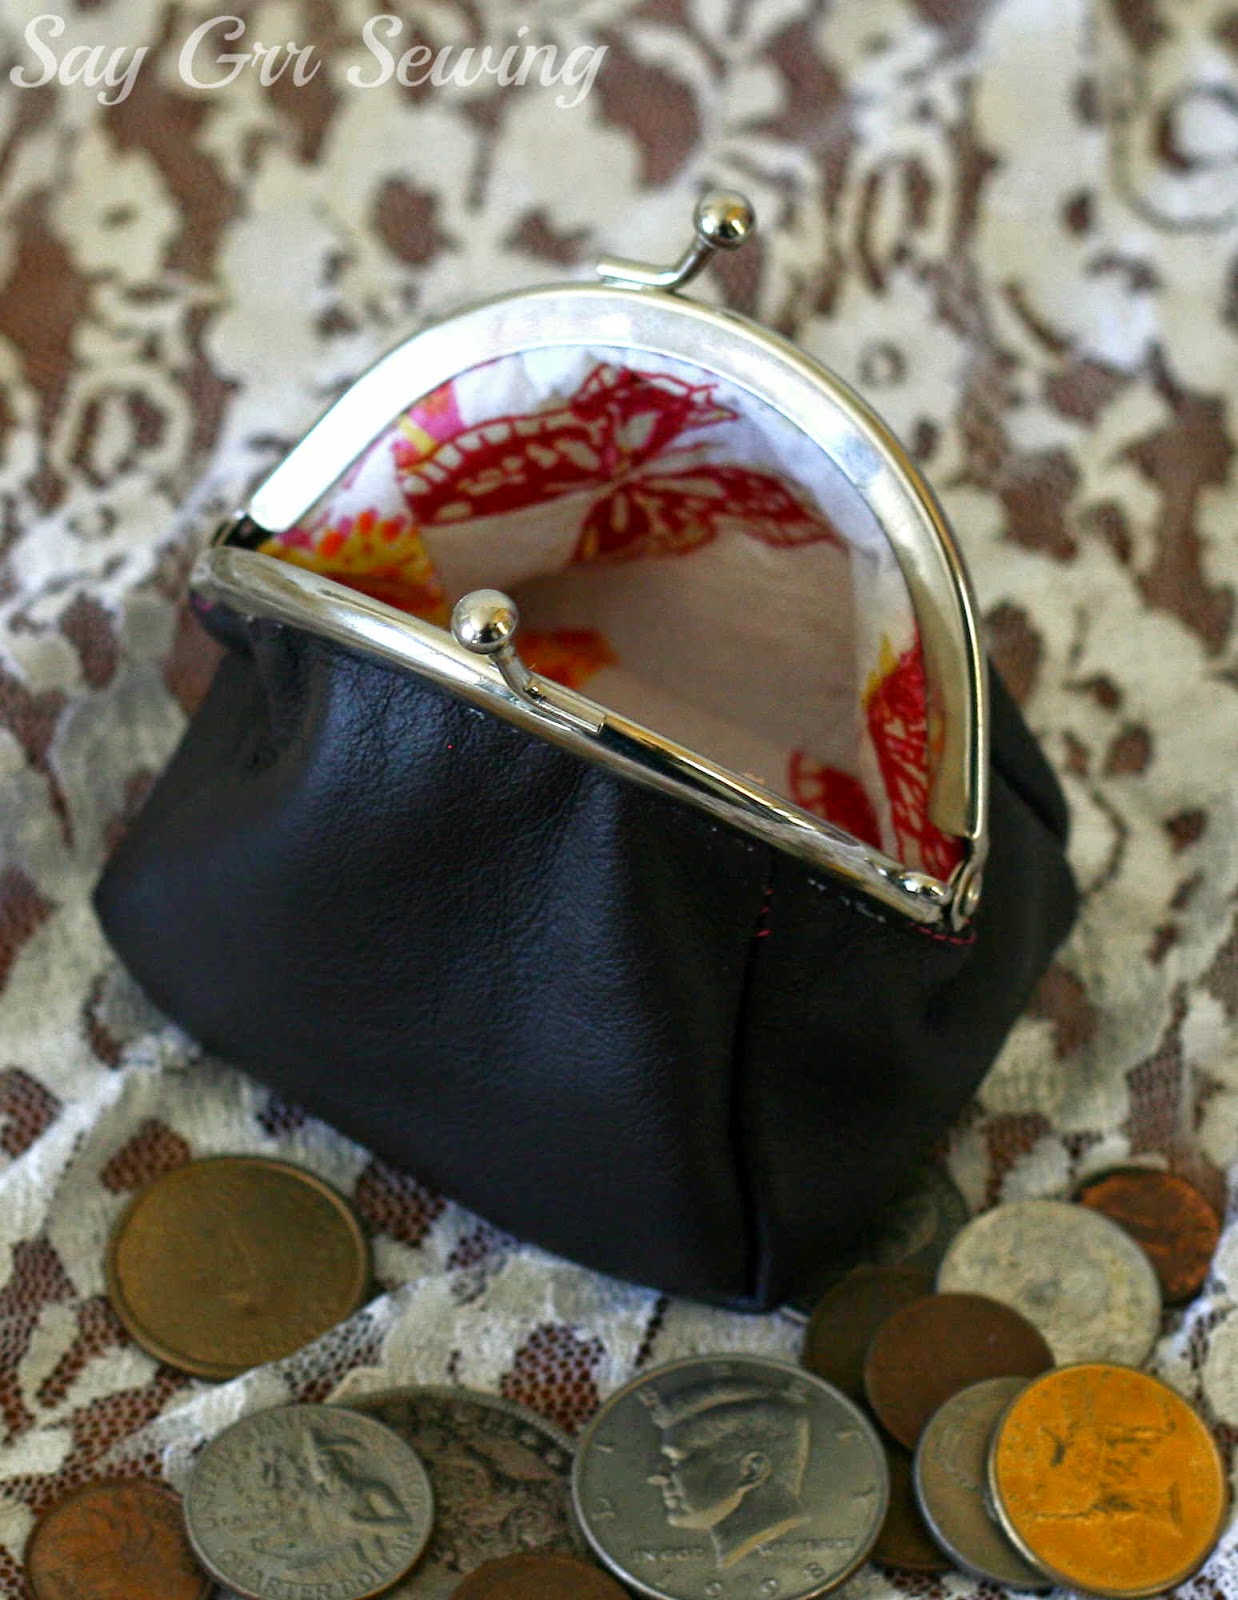 Say Grr Sewing: Leather Love Coin Purse